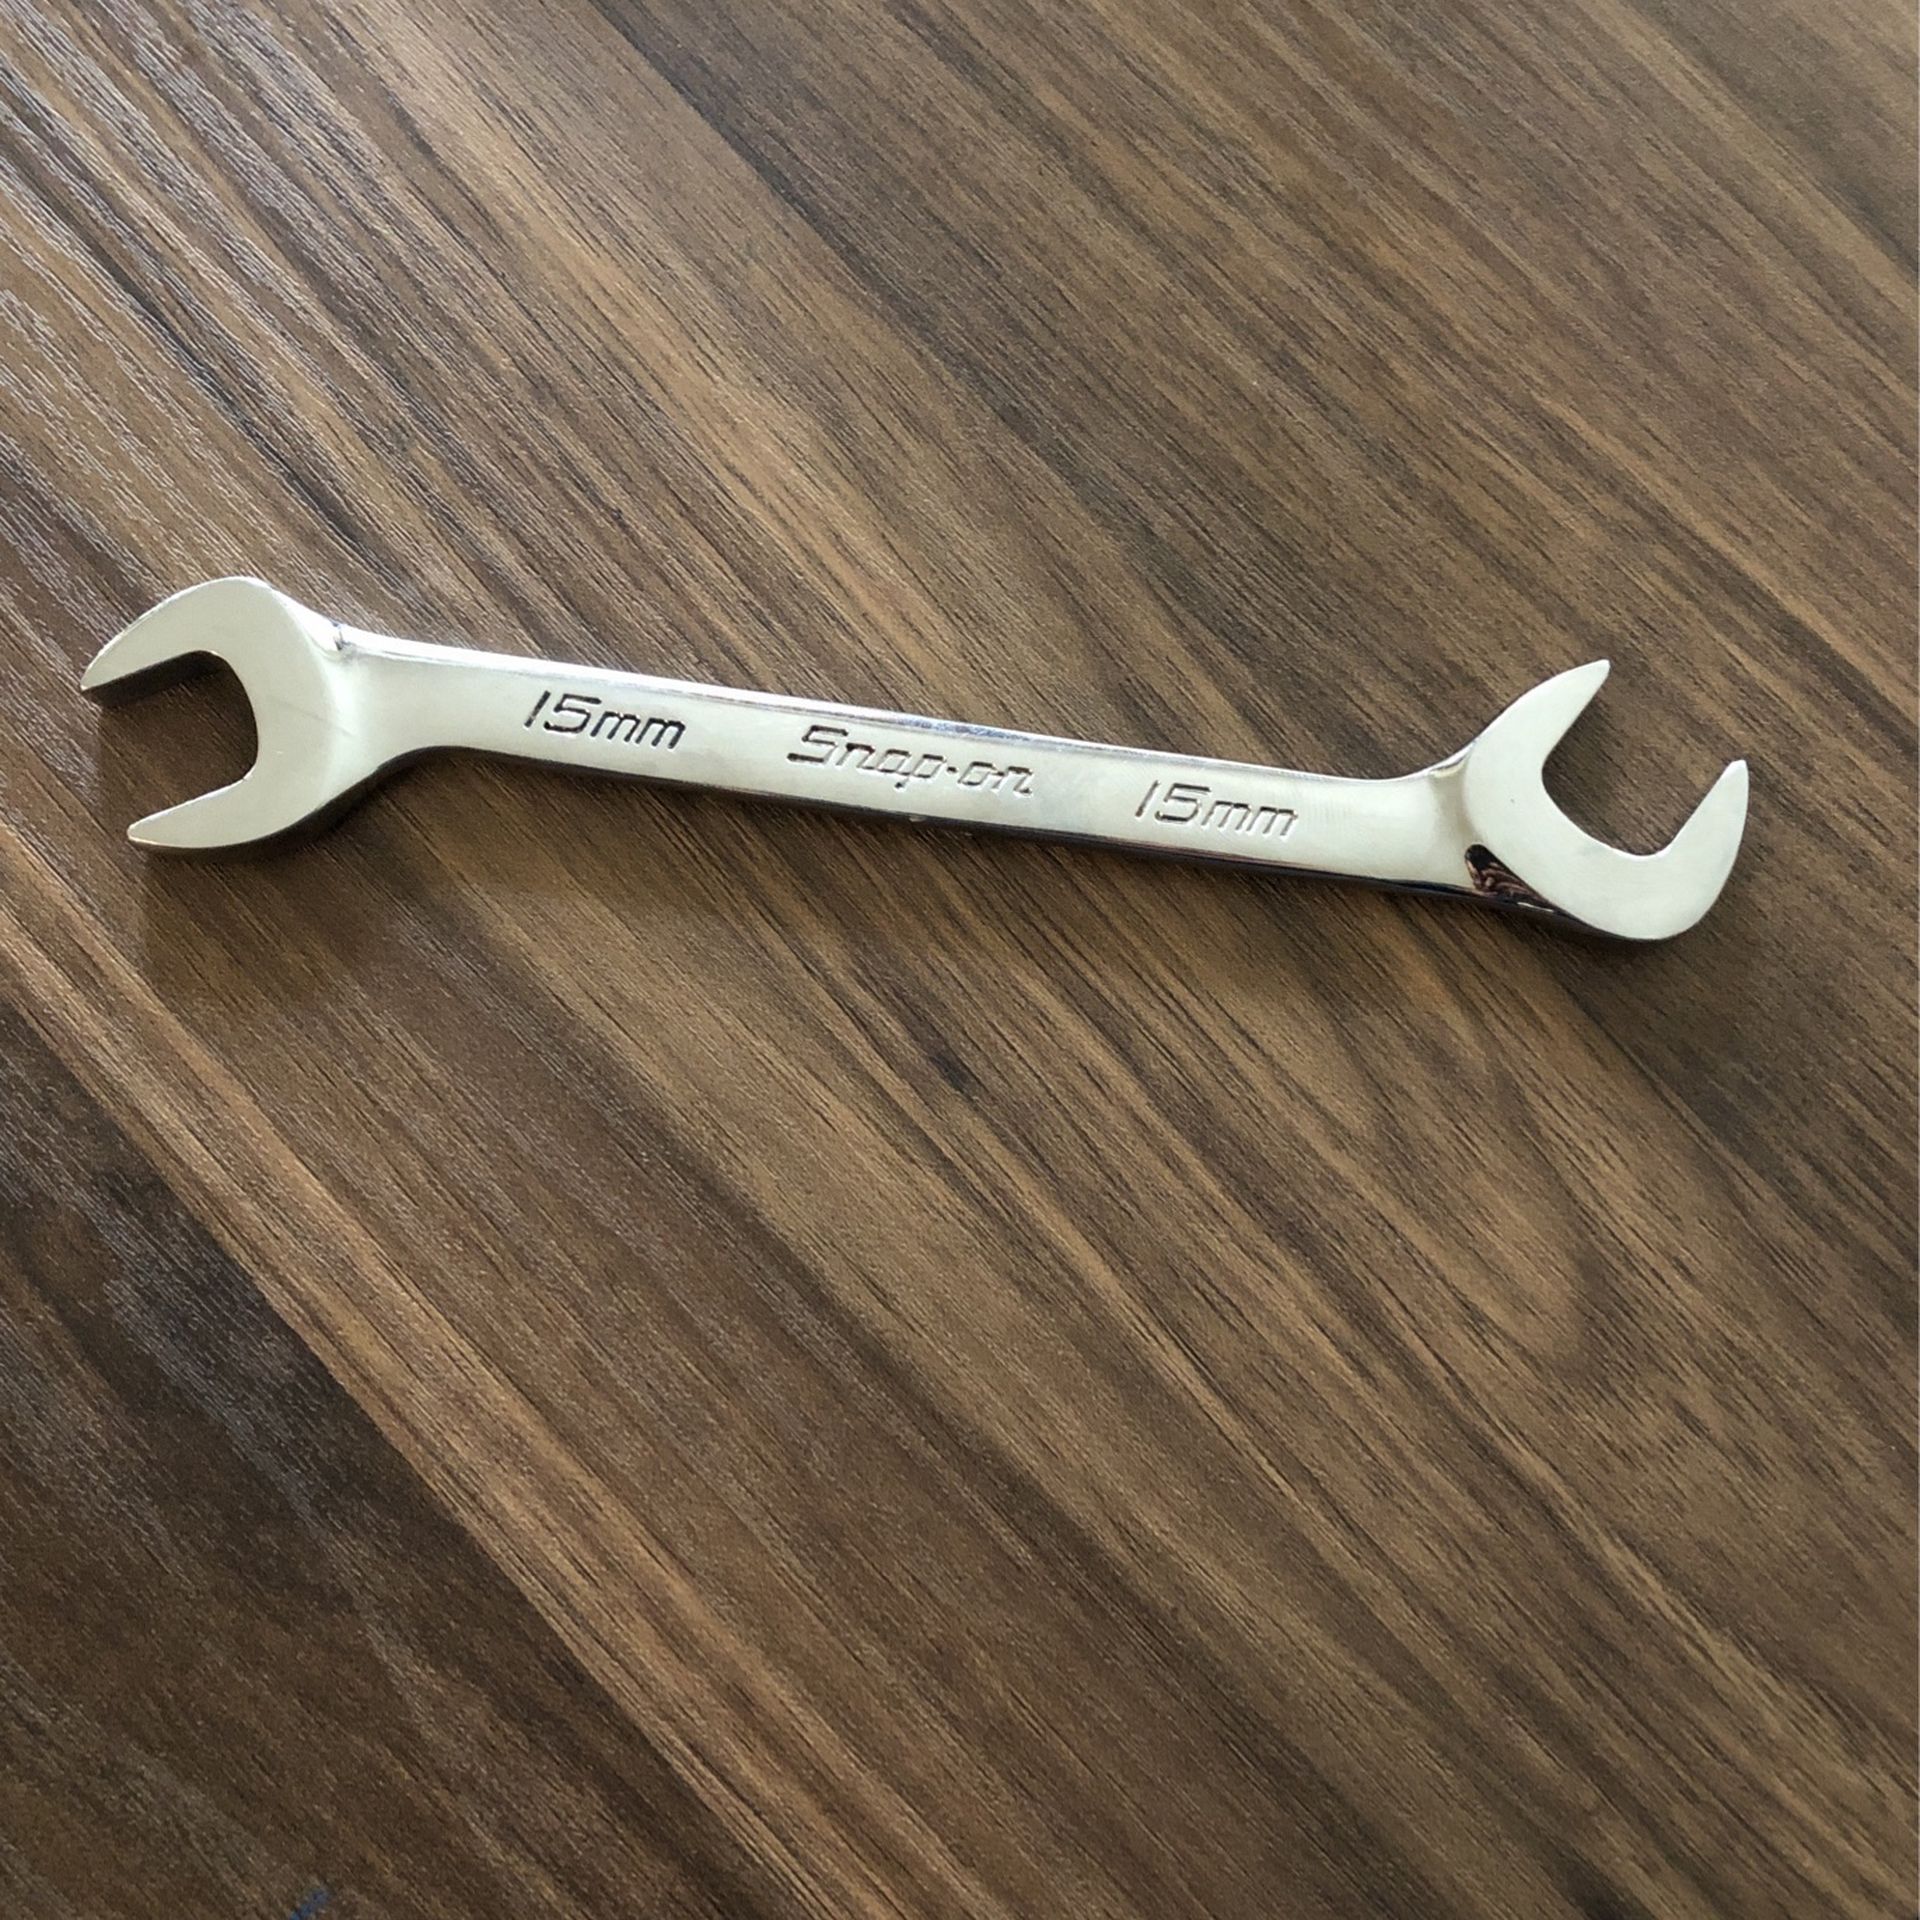 Snap On Metric 4-Way Angle Head Open End Wrench - 15mm - VSM5215B -